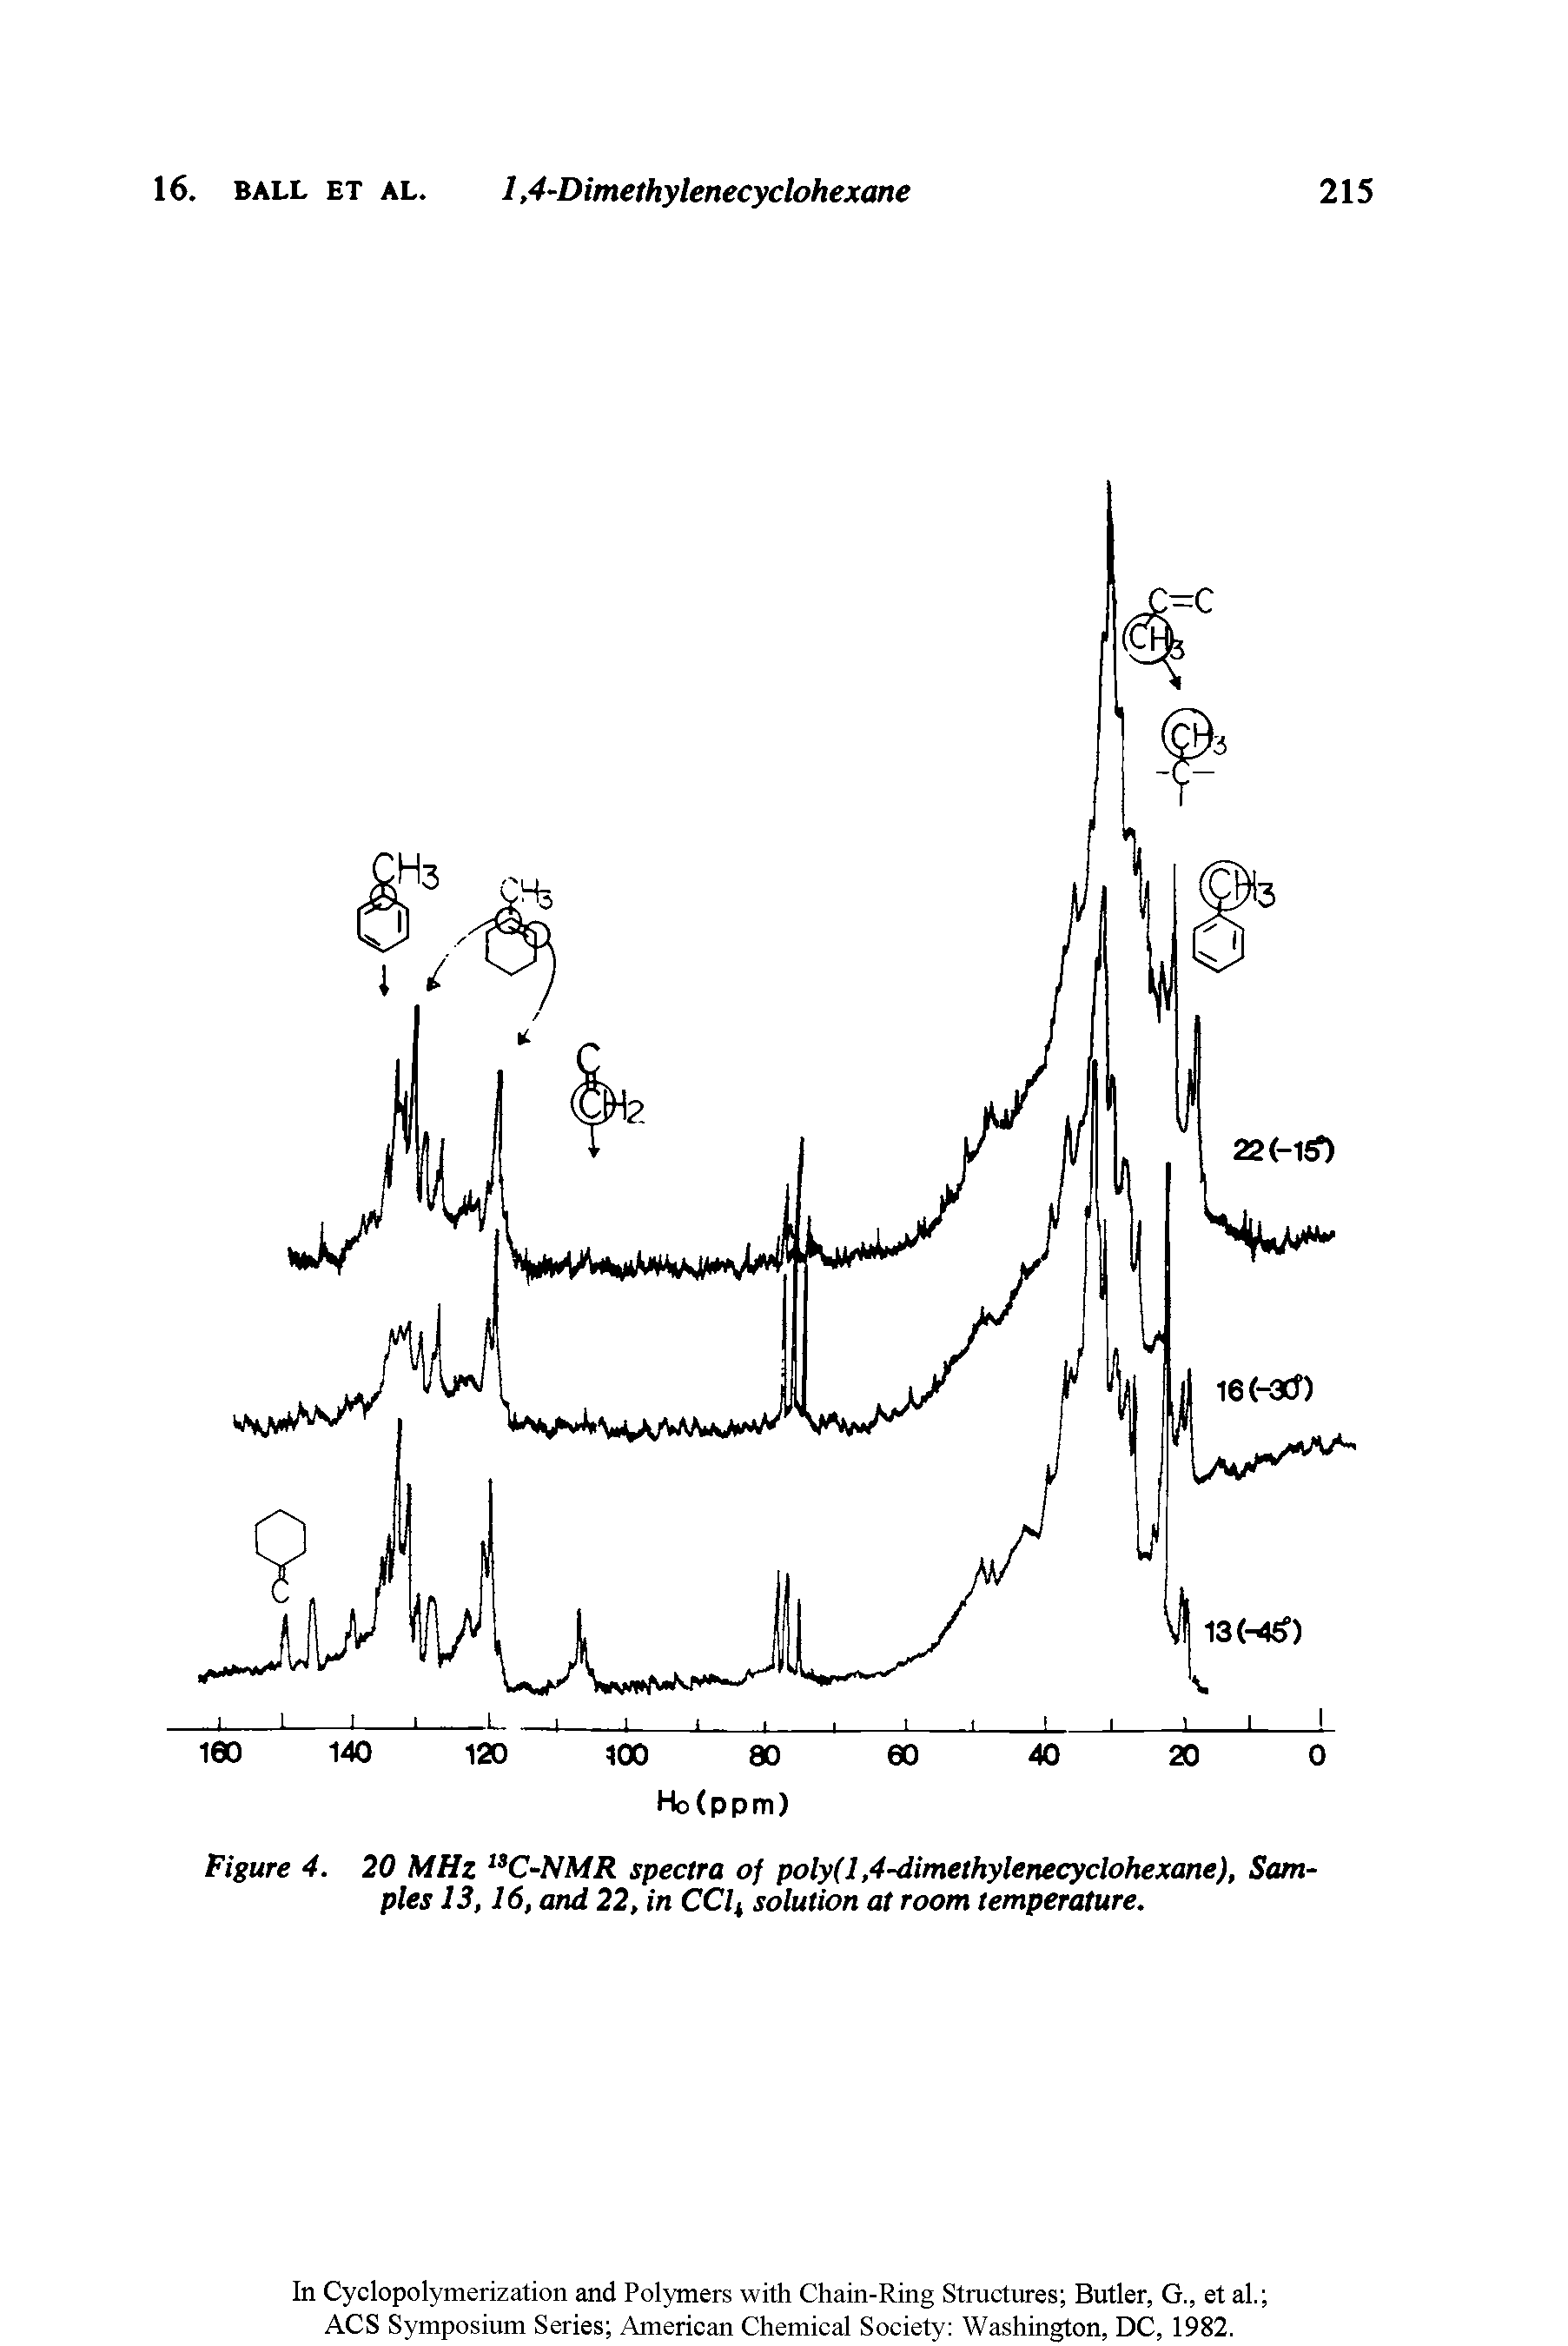 Figure 4. 20 MHz 1SC-NMR spectra of poly(l,4-dimethylenecyclohexane), Samples 13,16, and 22, in CCli solution at room temperature.